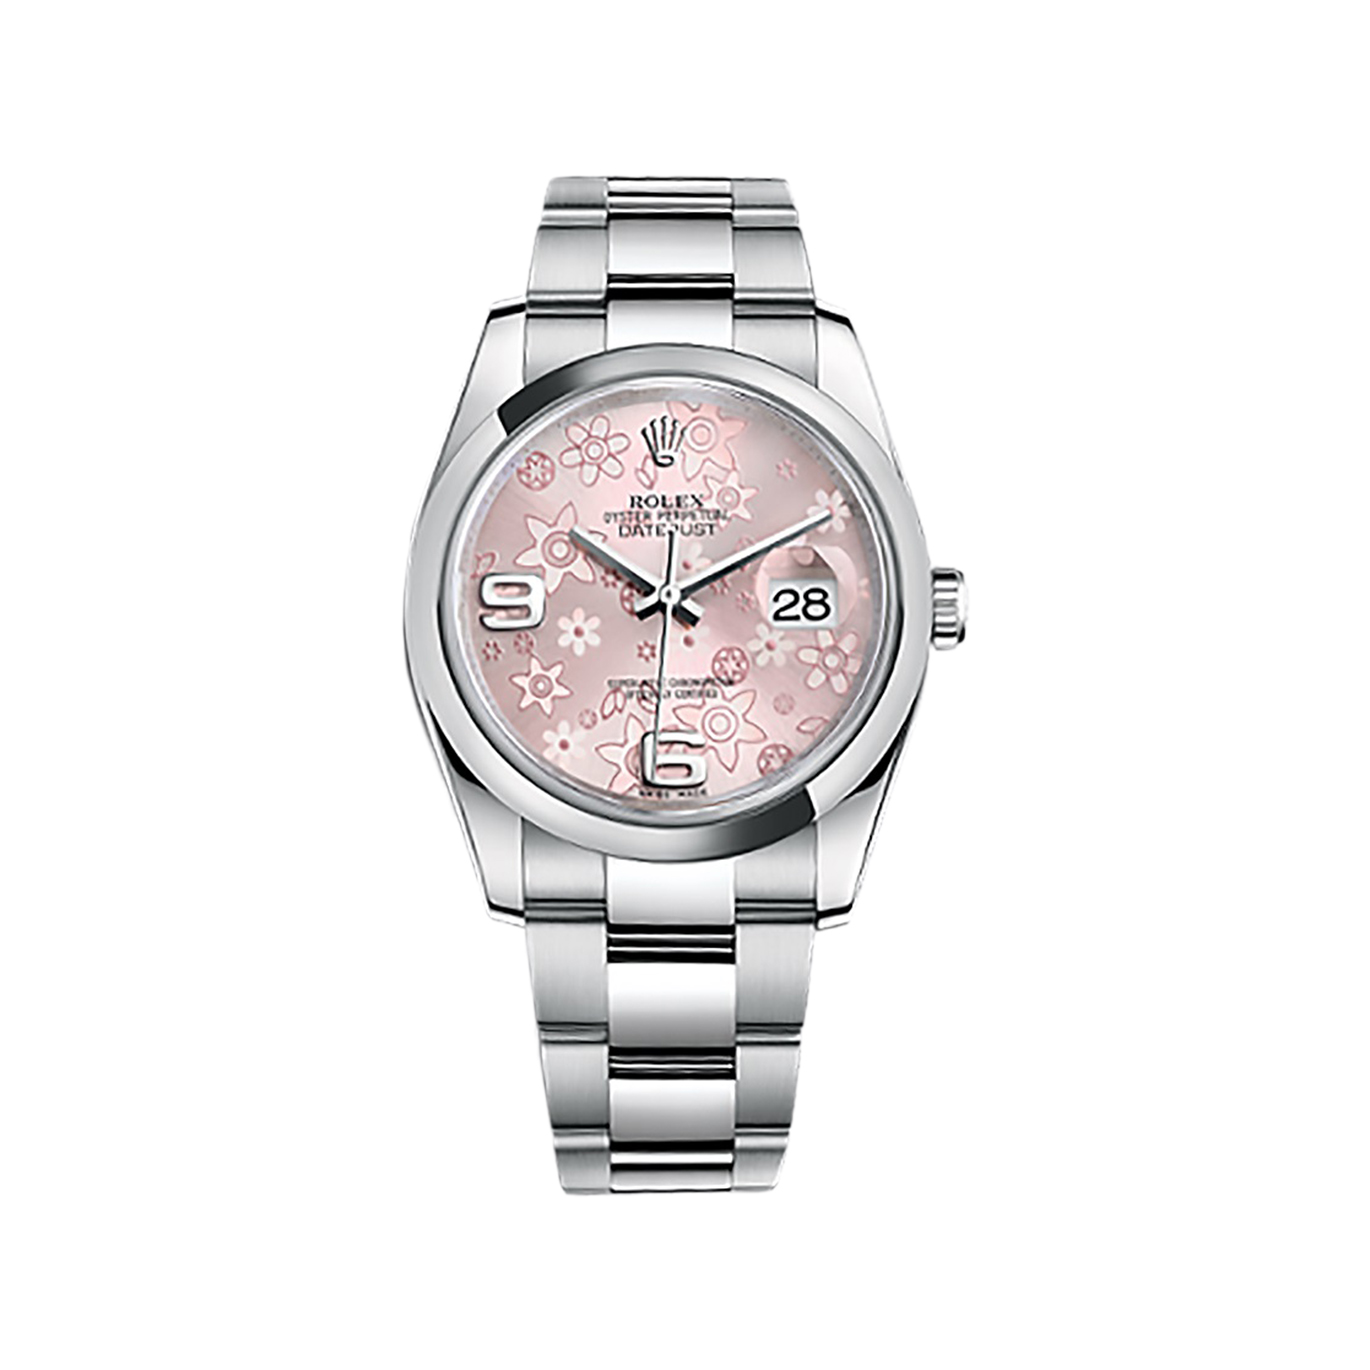 Datejust 36 116200 Stainless Steel Watch (Pink Floral Motif)